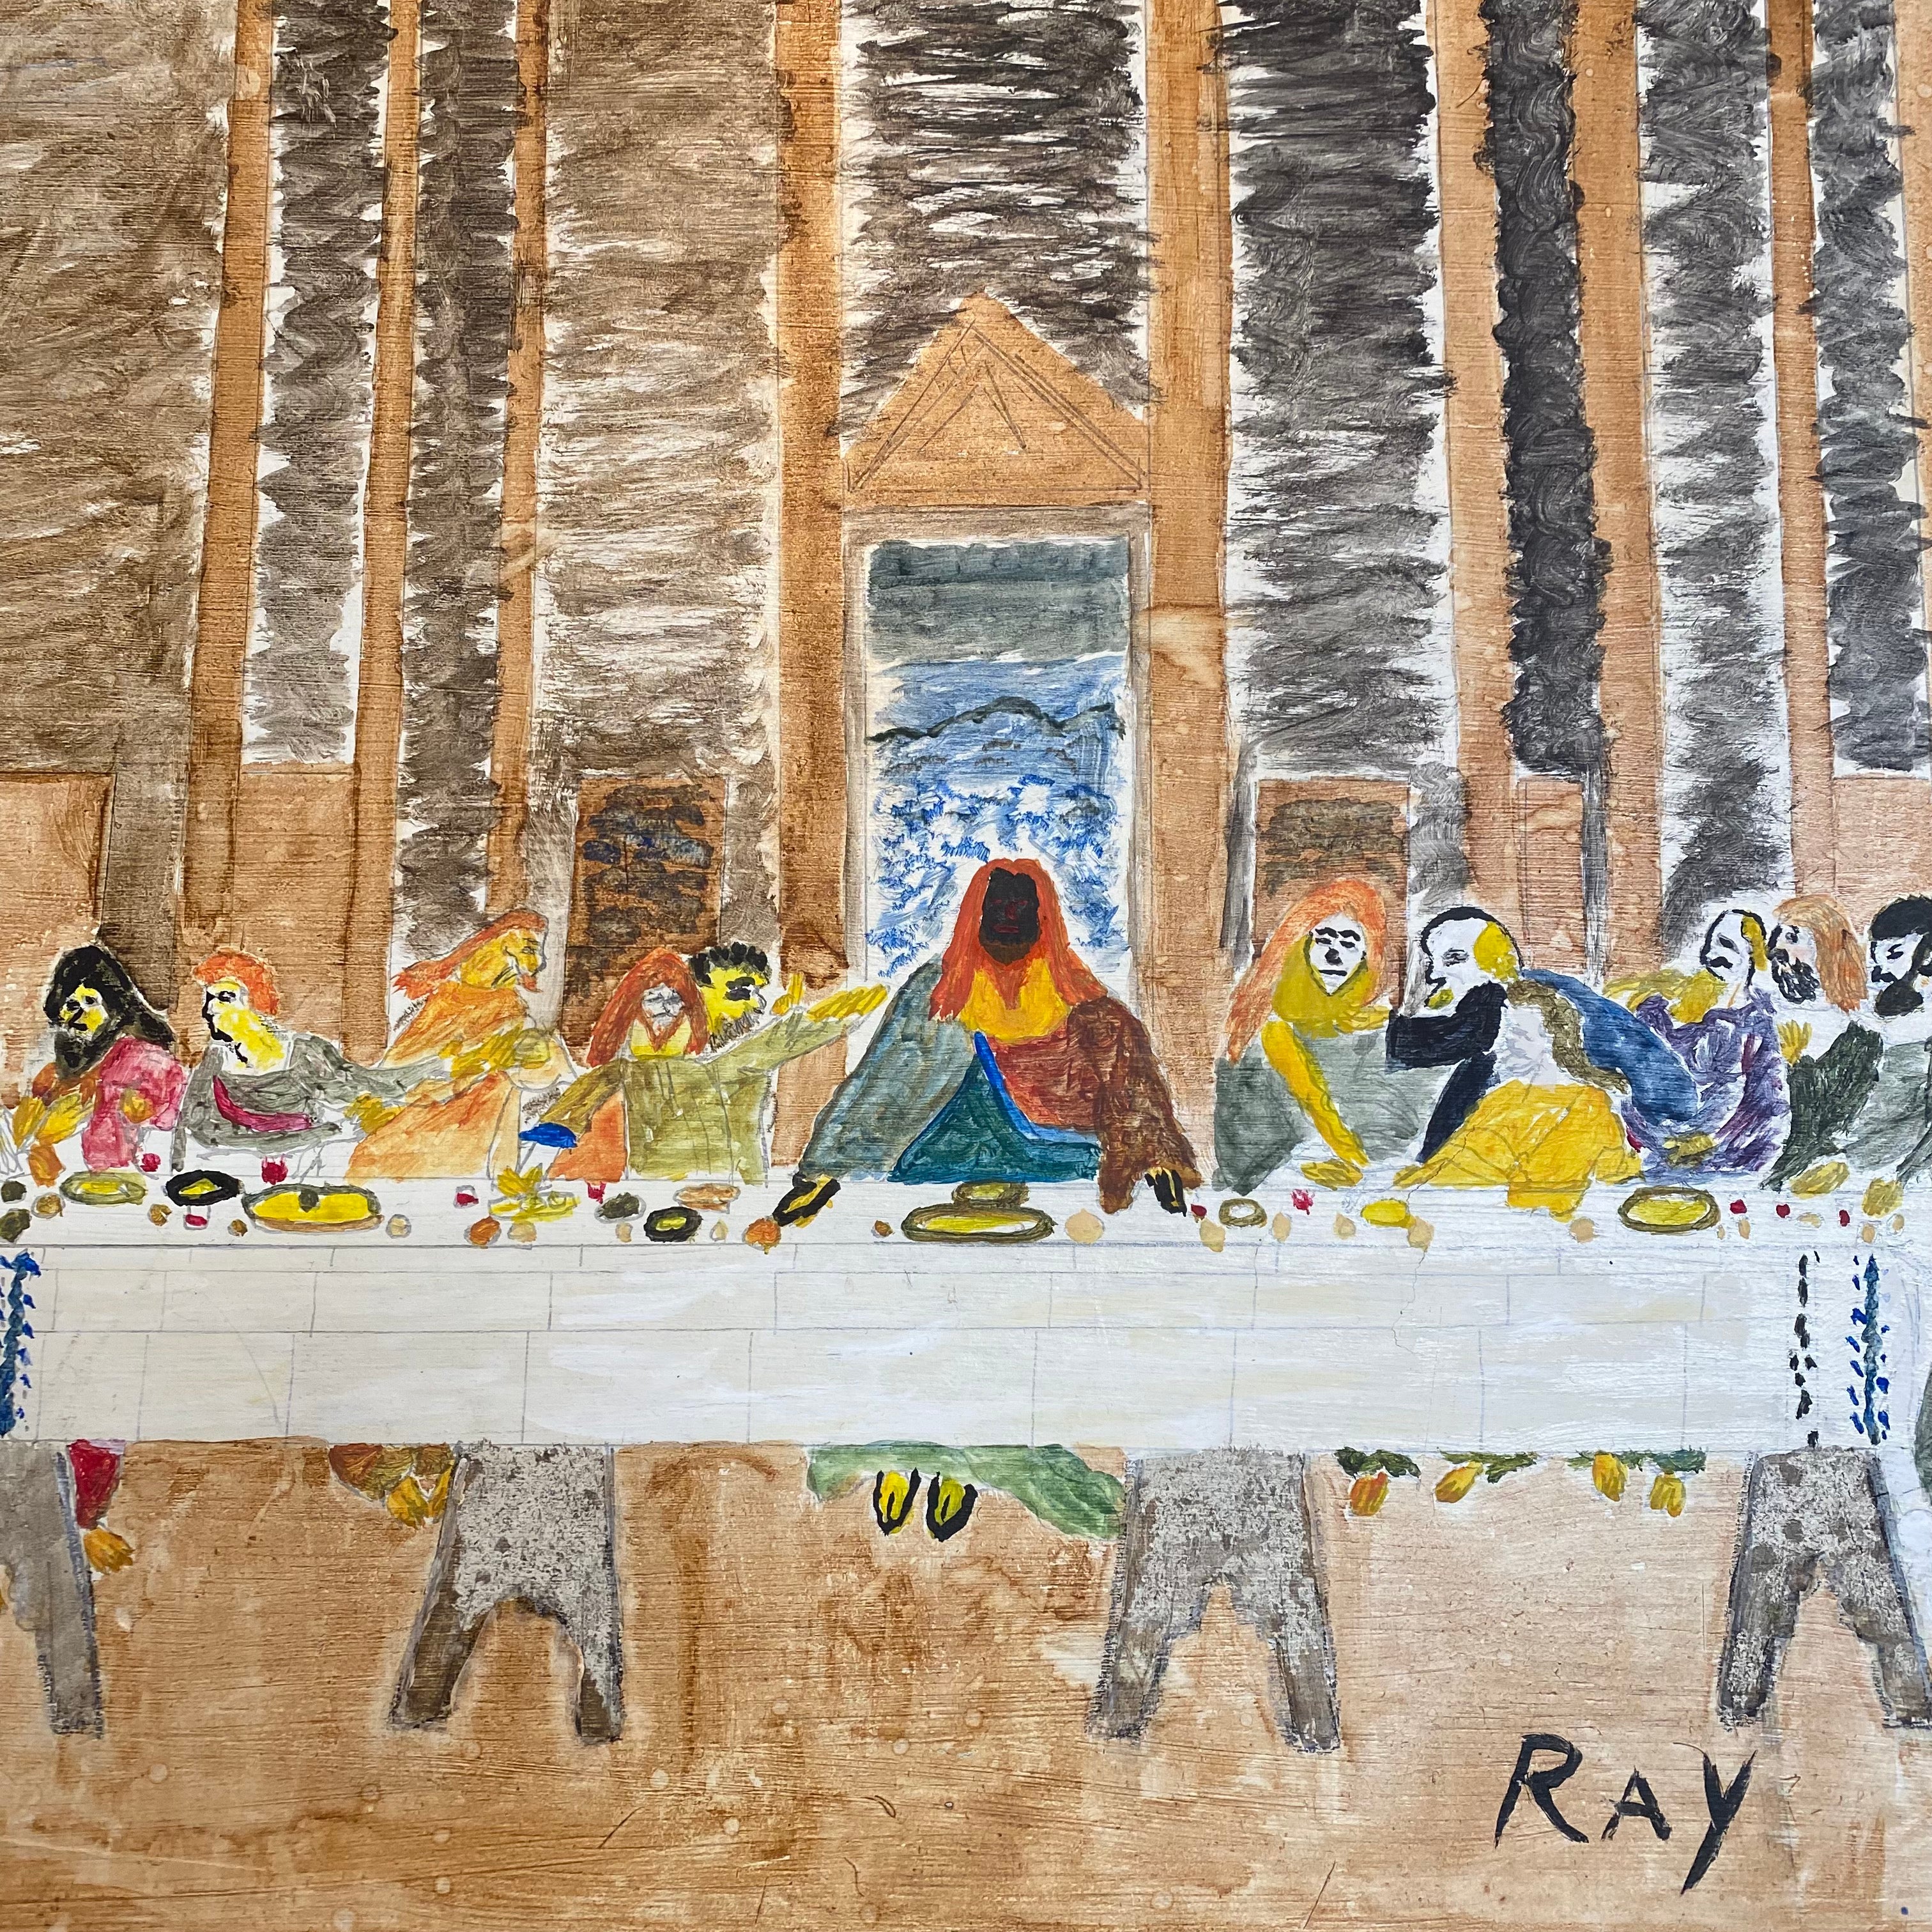 Last Supper Outside Art Painting of Last Supper Signed Ray - Folk Art Watercolor Paintings on Cardboard - Southern Artwork - Virginia Artist - Scarce